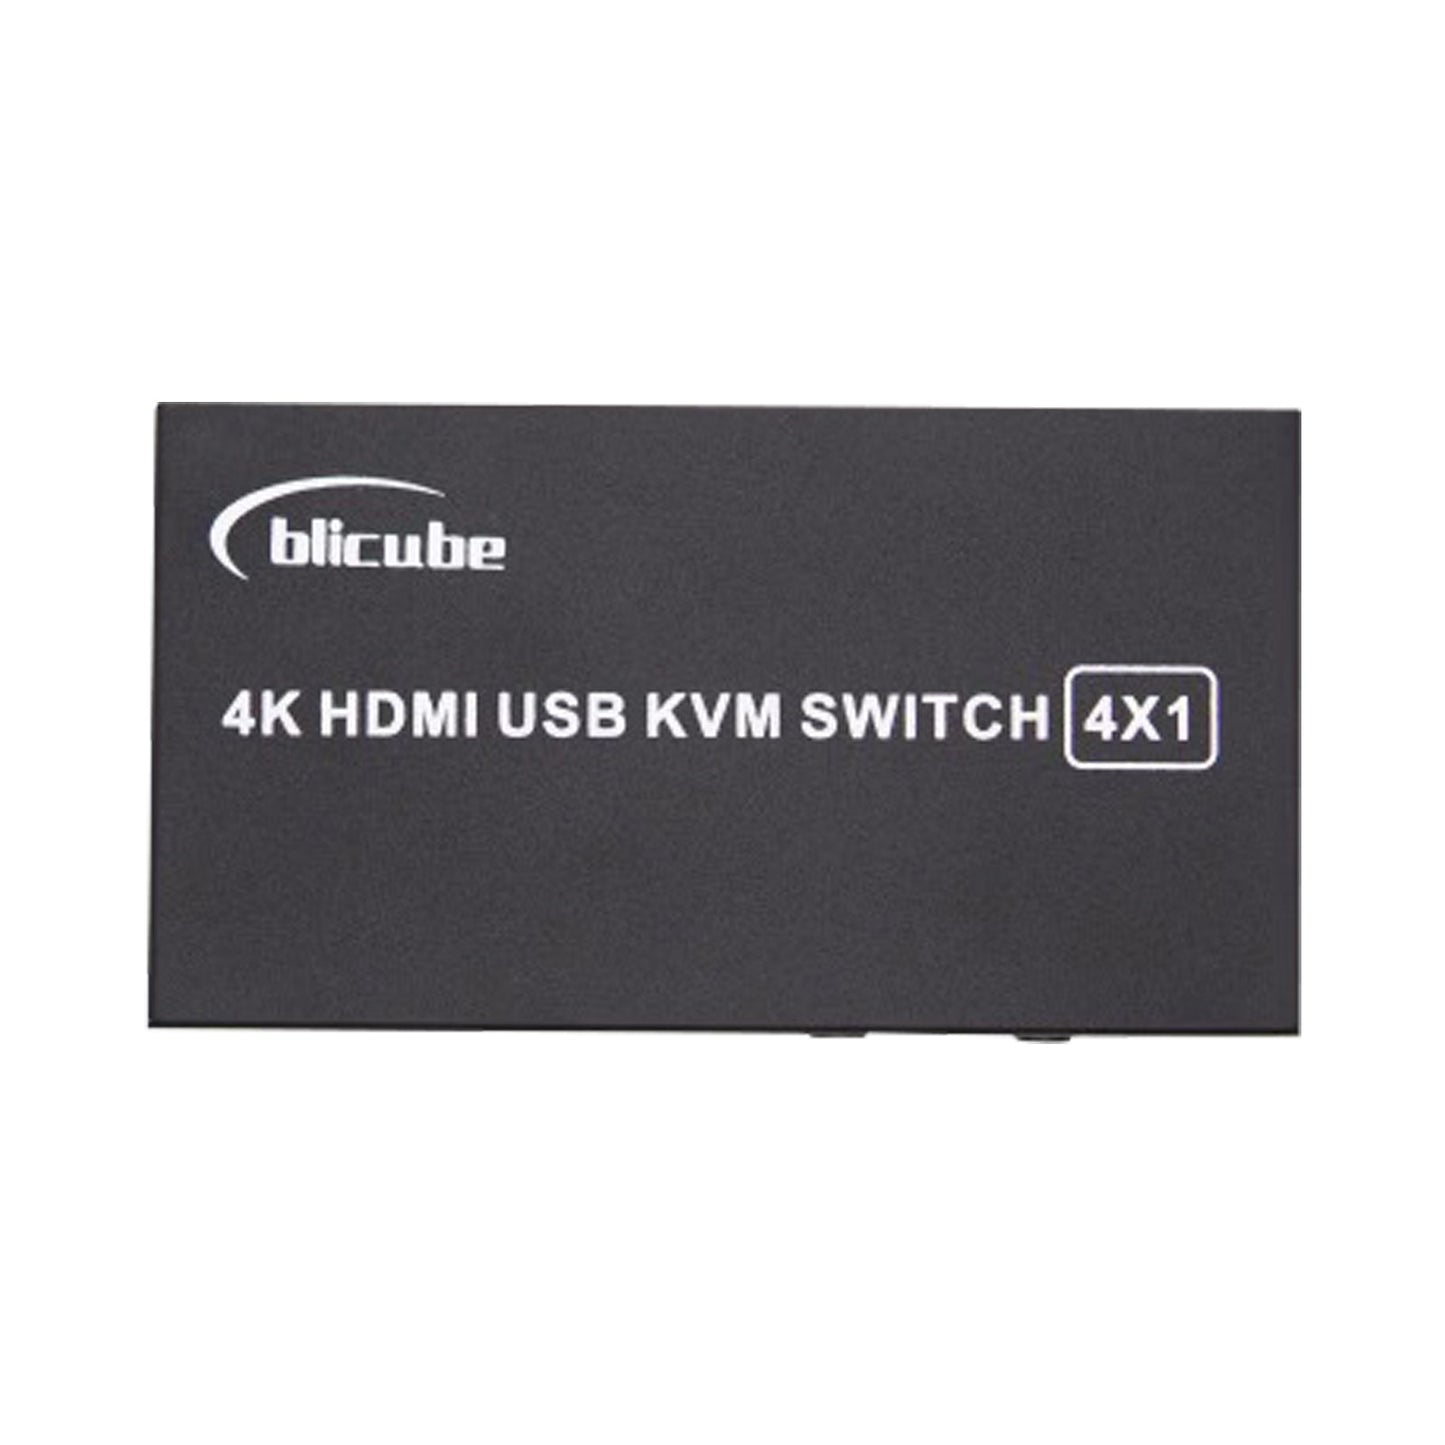 HDMI KVM Switch four-to-one Channel Converter Supports BLKVM PIKVM